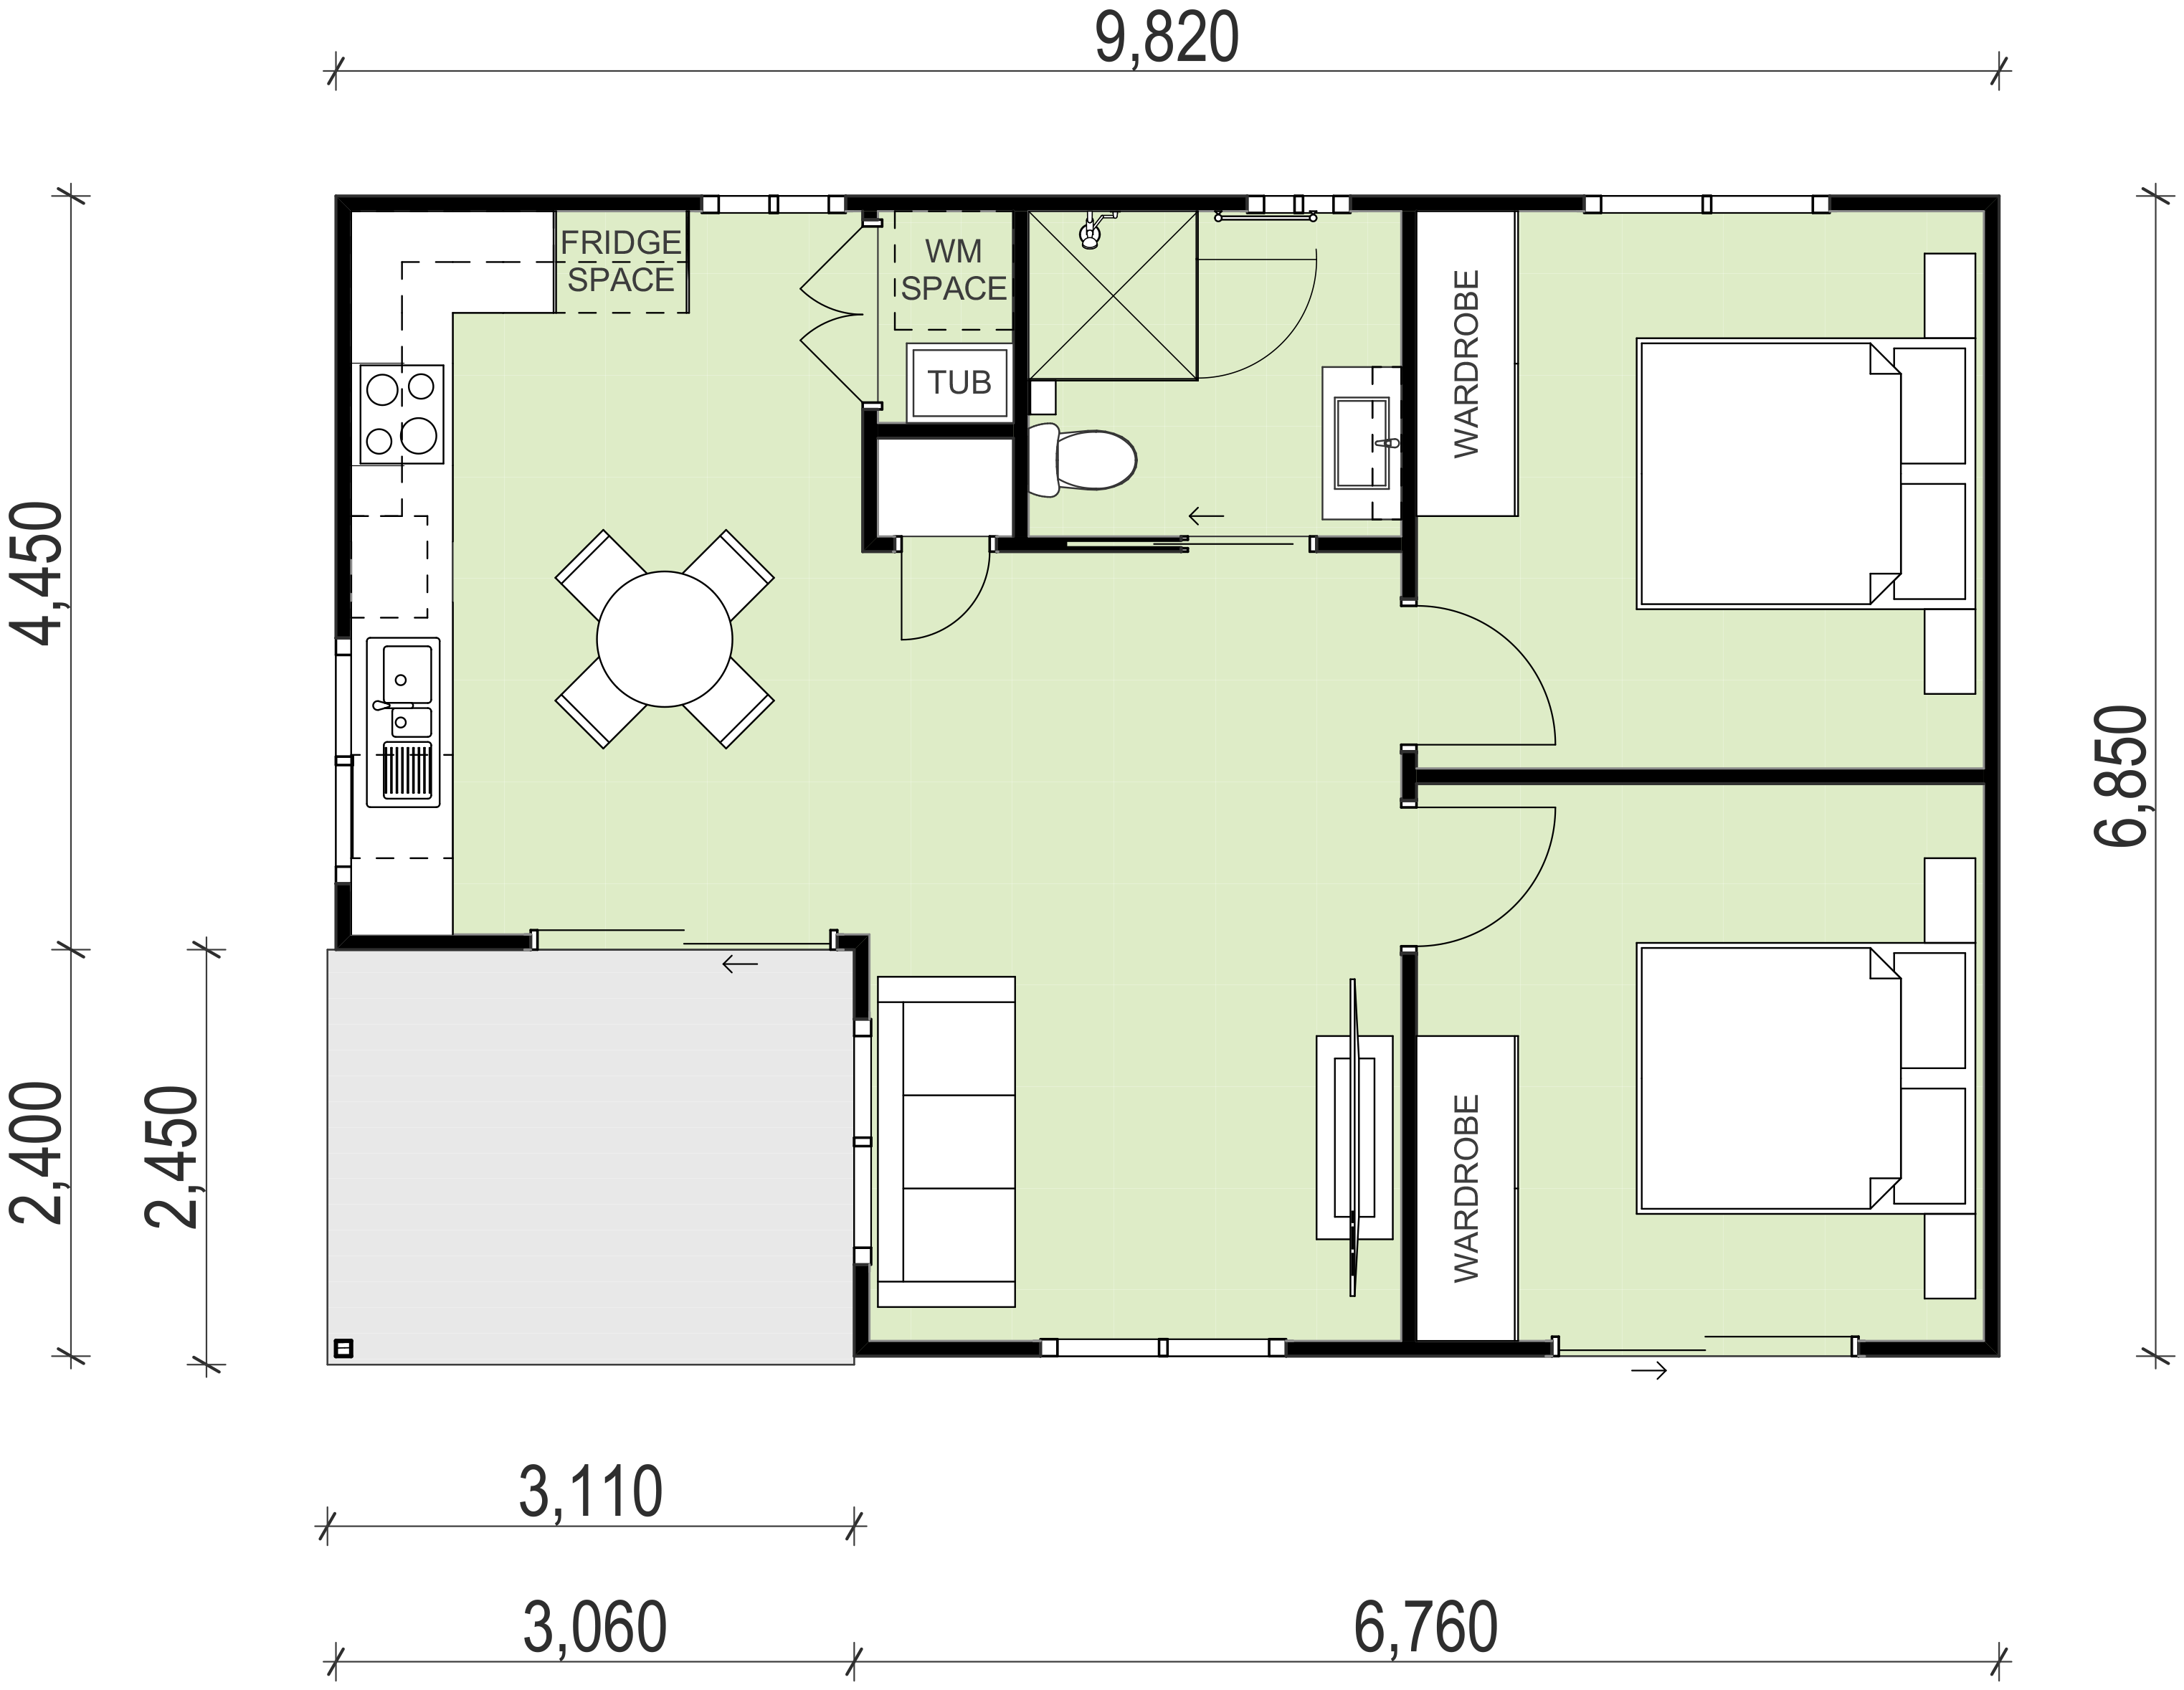 Granny flat with 1 bathroom and 2 bedrooms